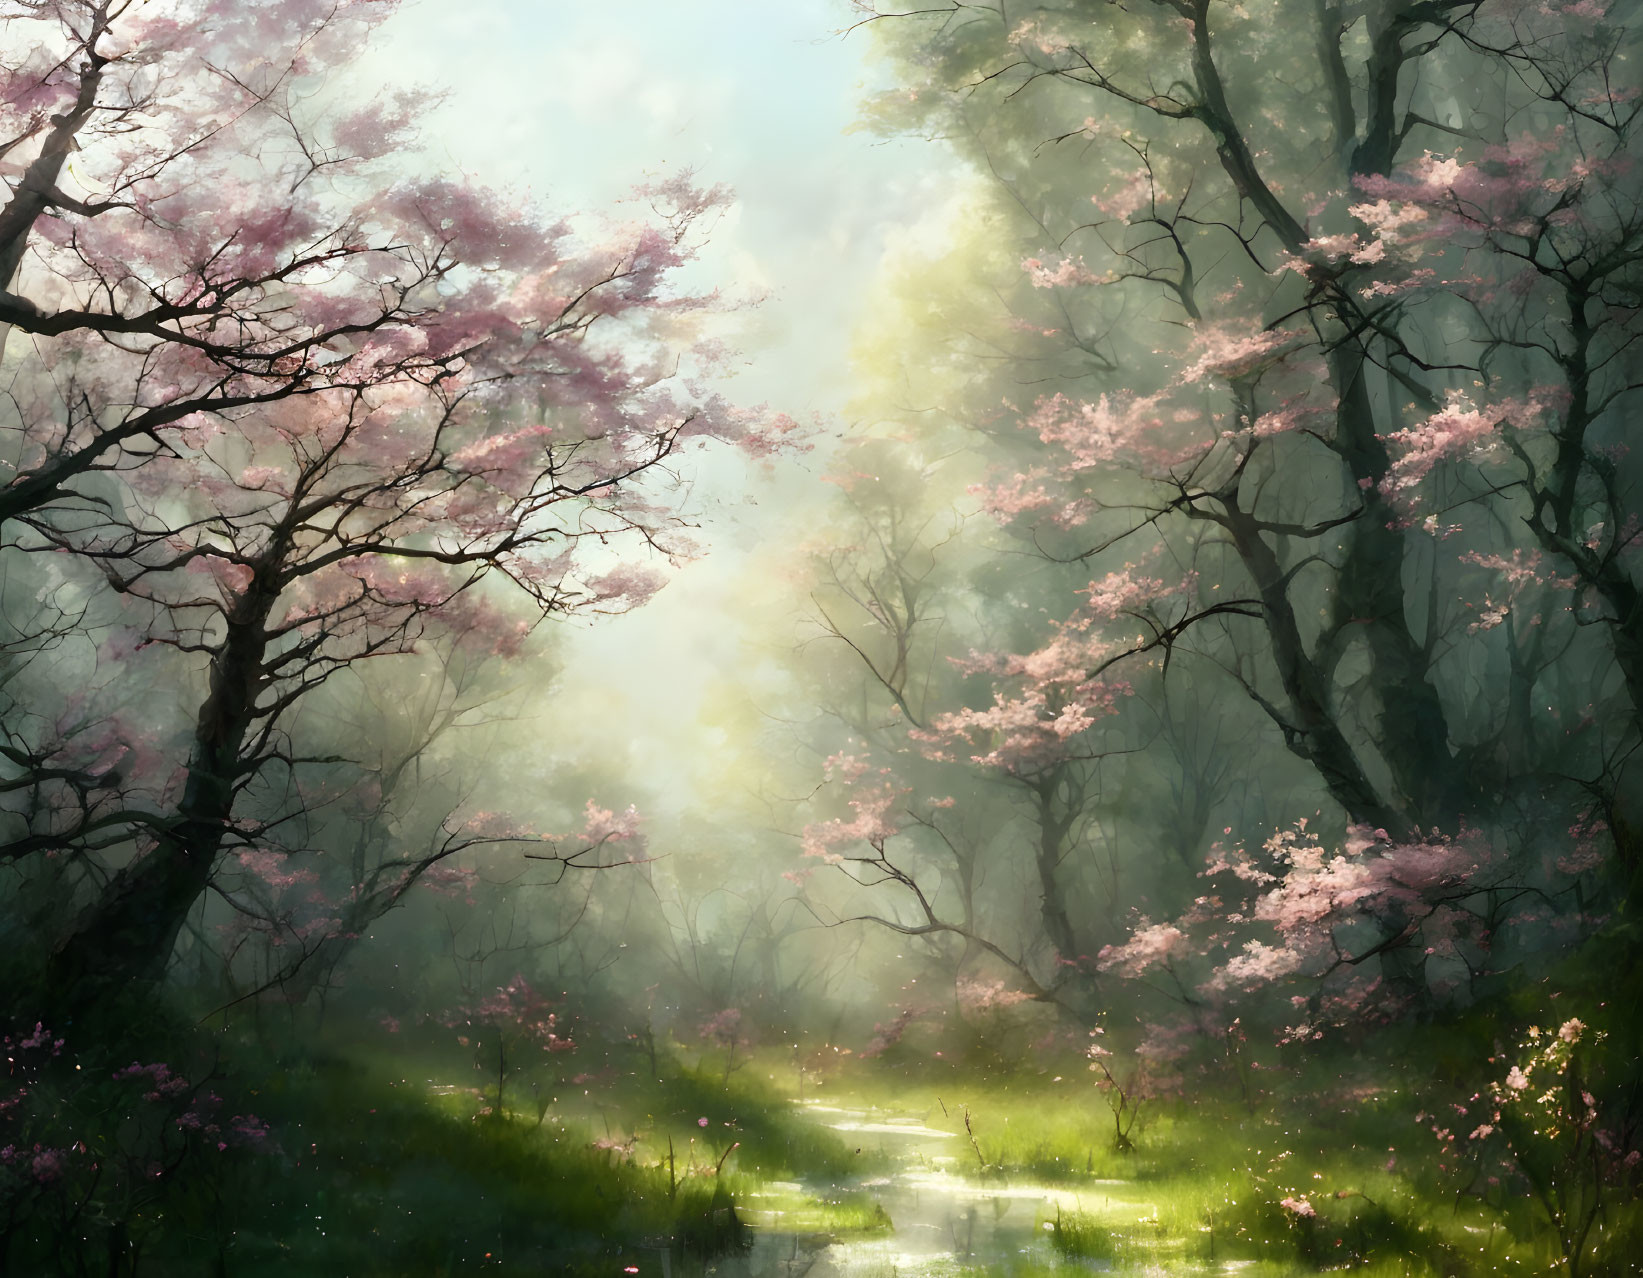 Tranquil Forest Path with Pink Cherry Blossoms and Sunbeams